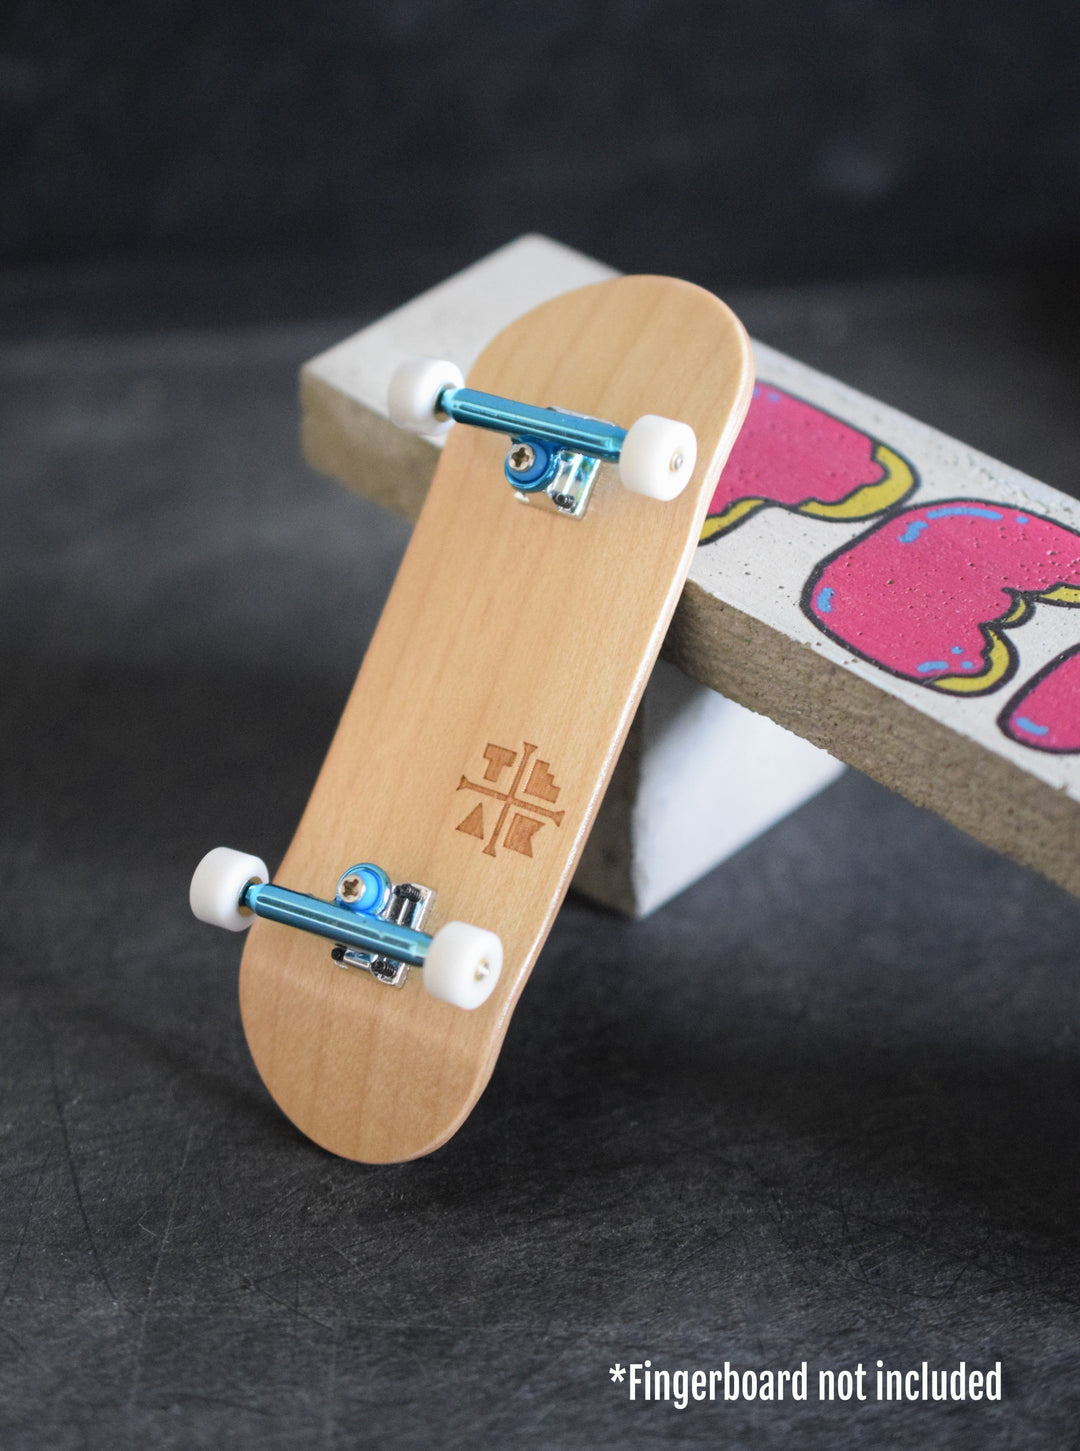 Teak Tuning Prodigy Pro Inverted Fingerboard Trucks, 34mm - Electric Blue Colorway